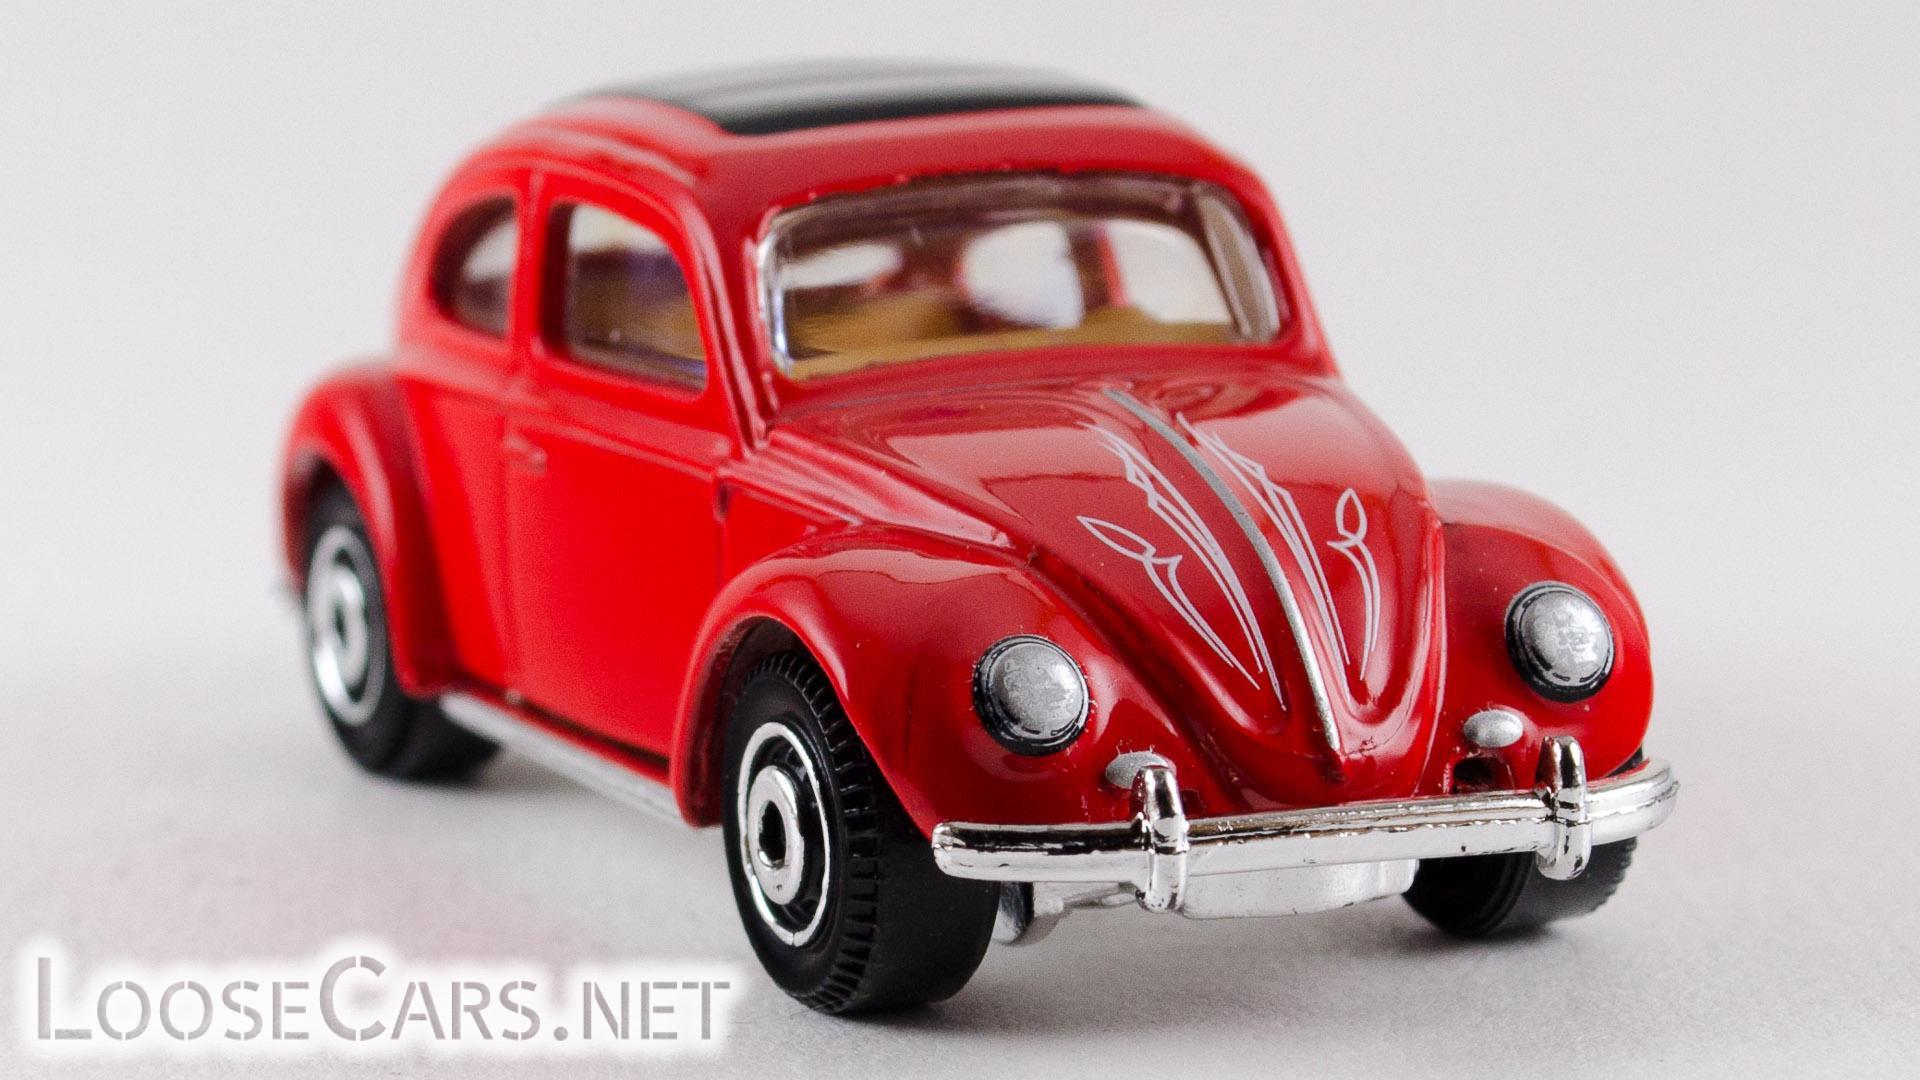 Matchbox 1962 Volkswagen Beetle: 2013 60th Front Right